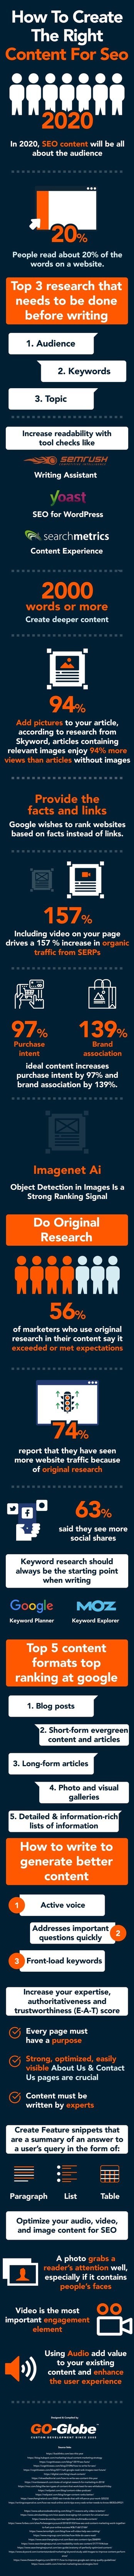 How to create the right content for seo [Infographic]